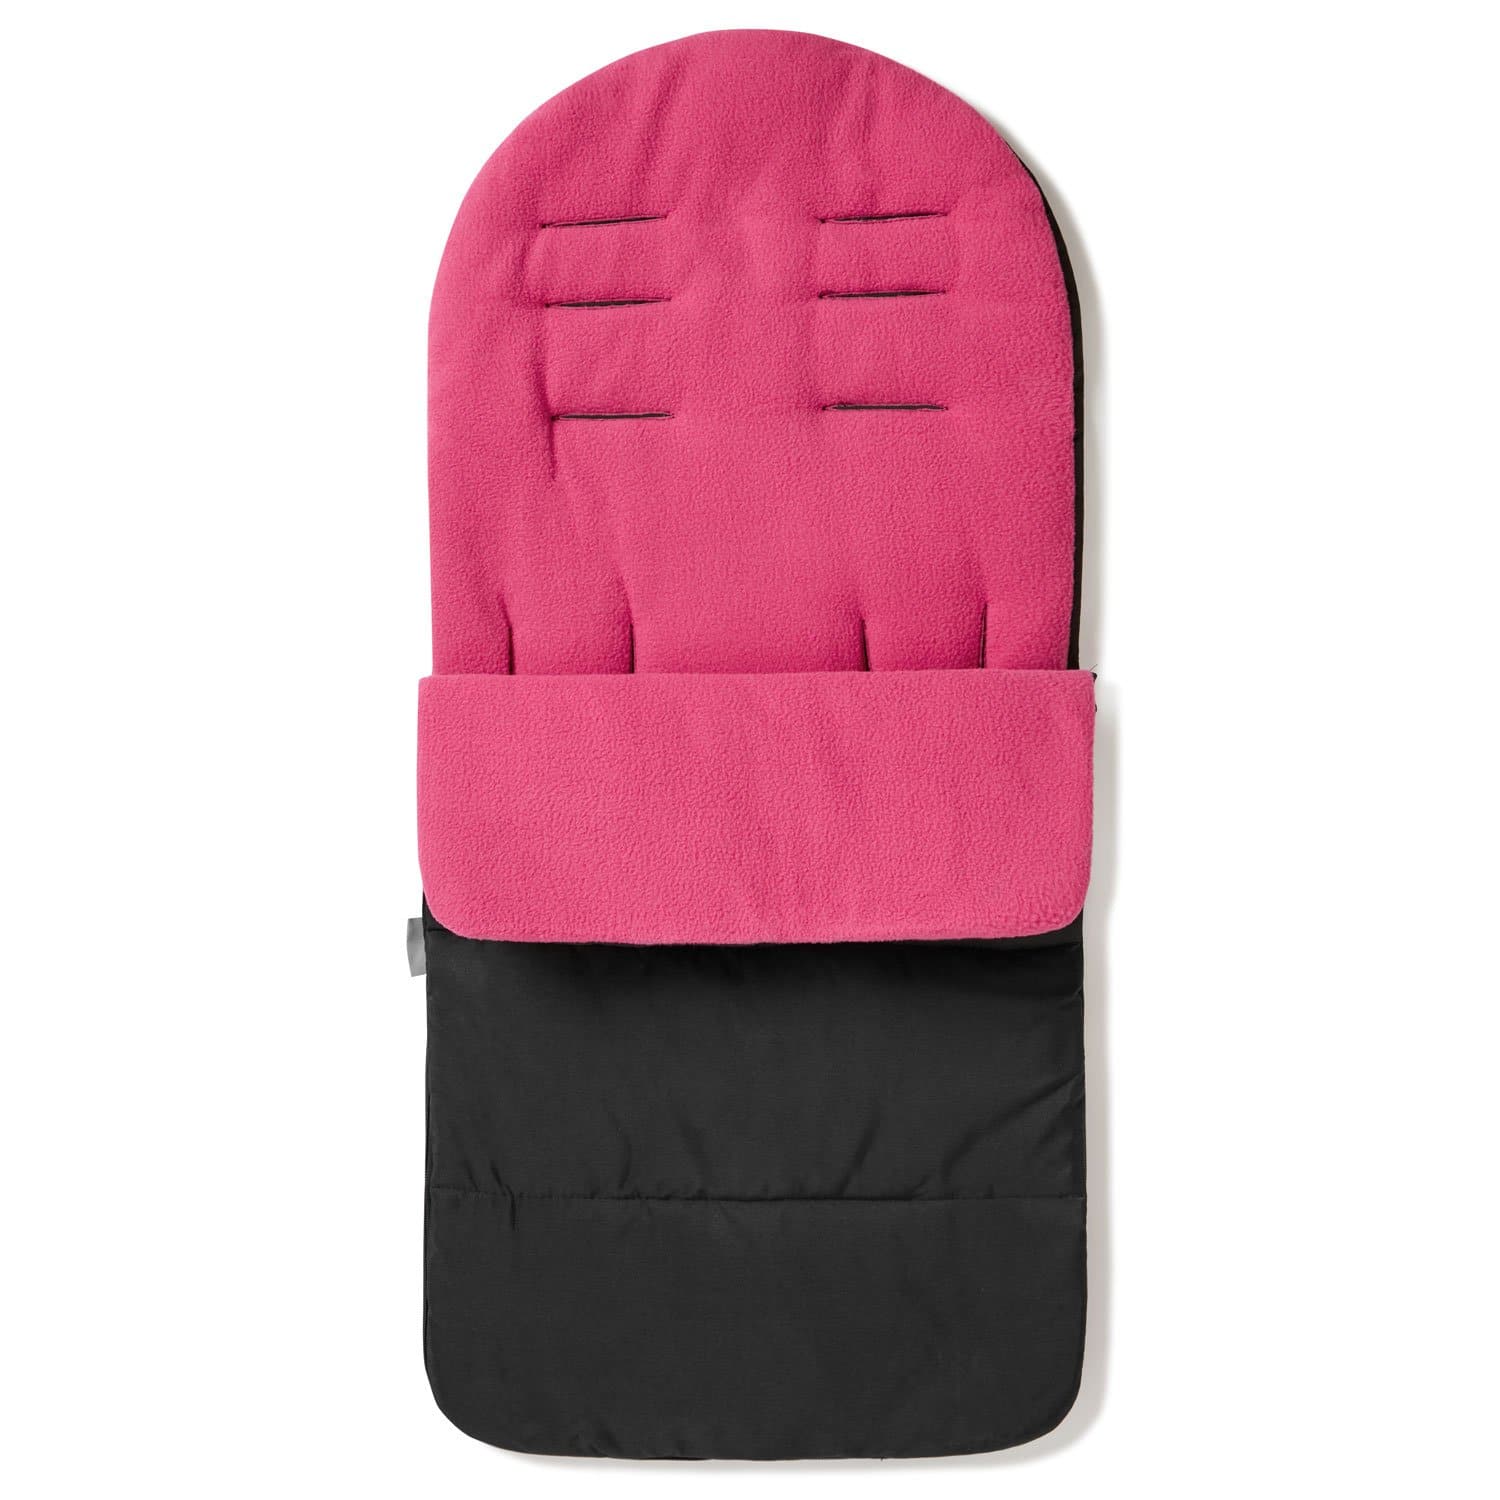 Premium Footmuff / Cosy Toes Compatible with Hybrid - Pink Rose / Fits All Models | For Your Little One